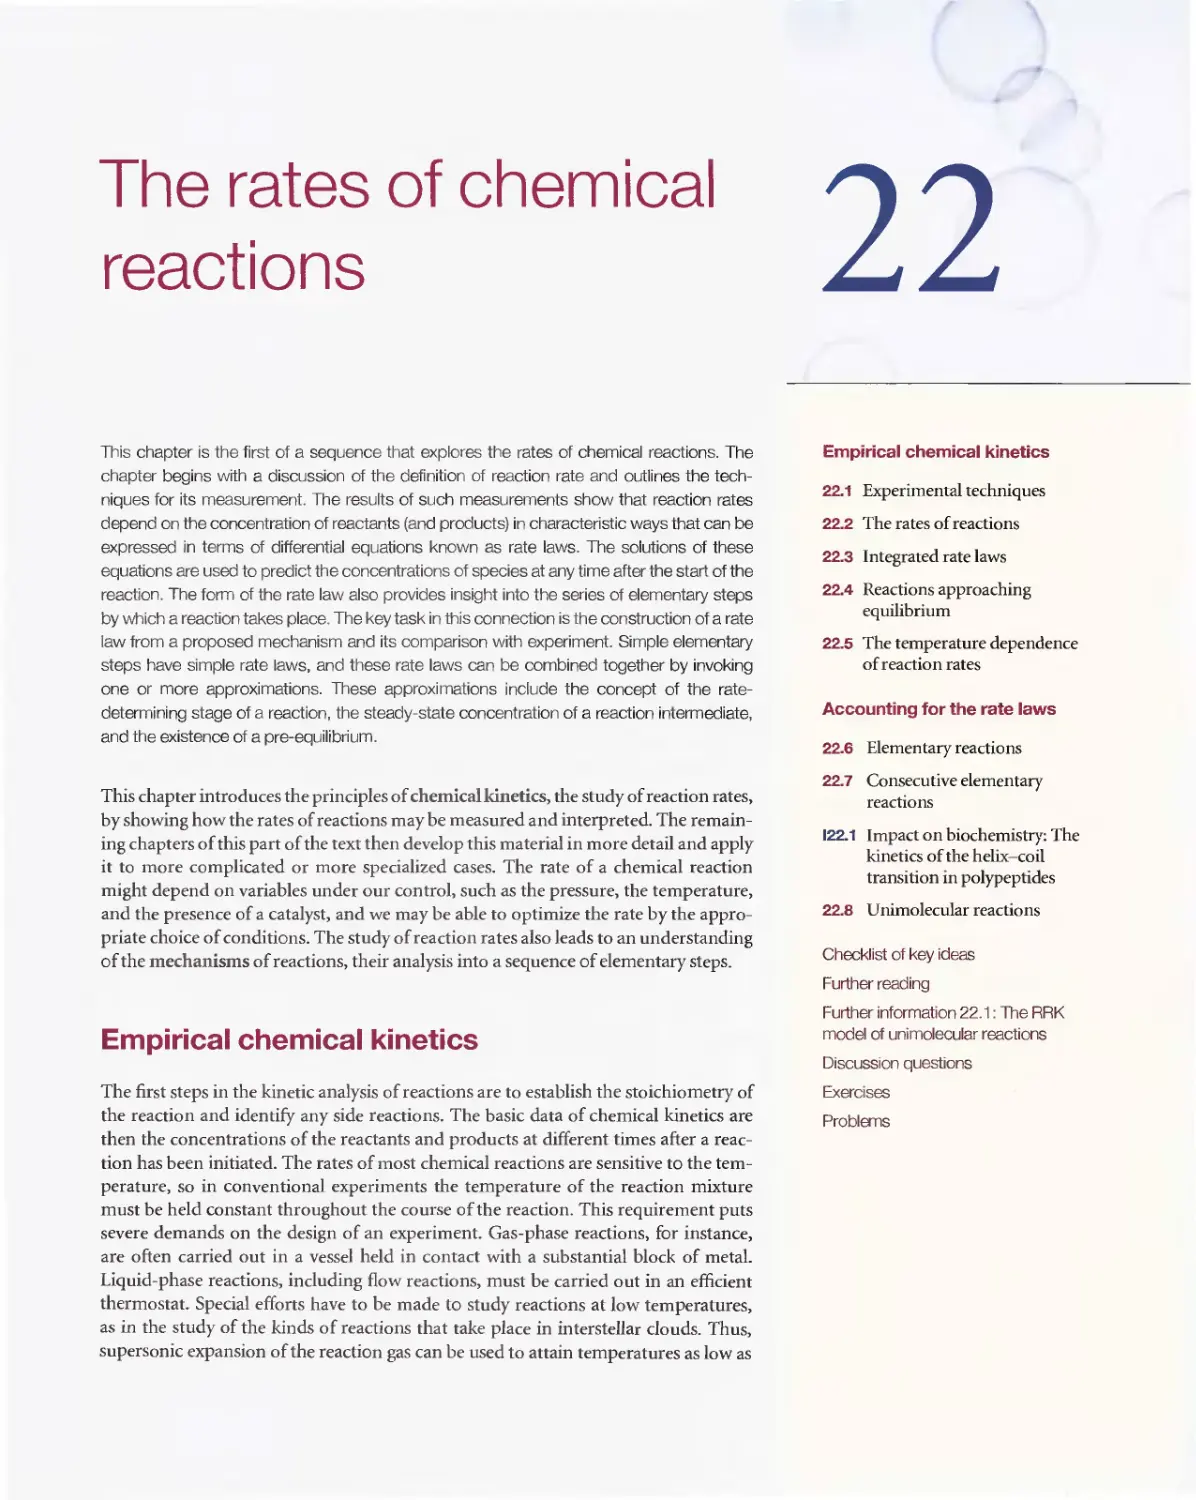 22 - The rates of chemical reactions